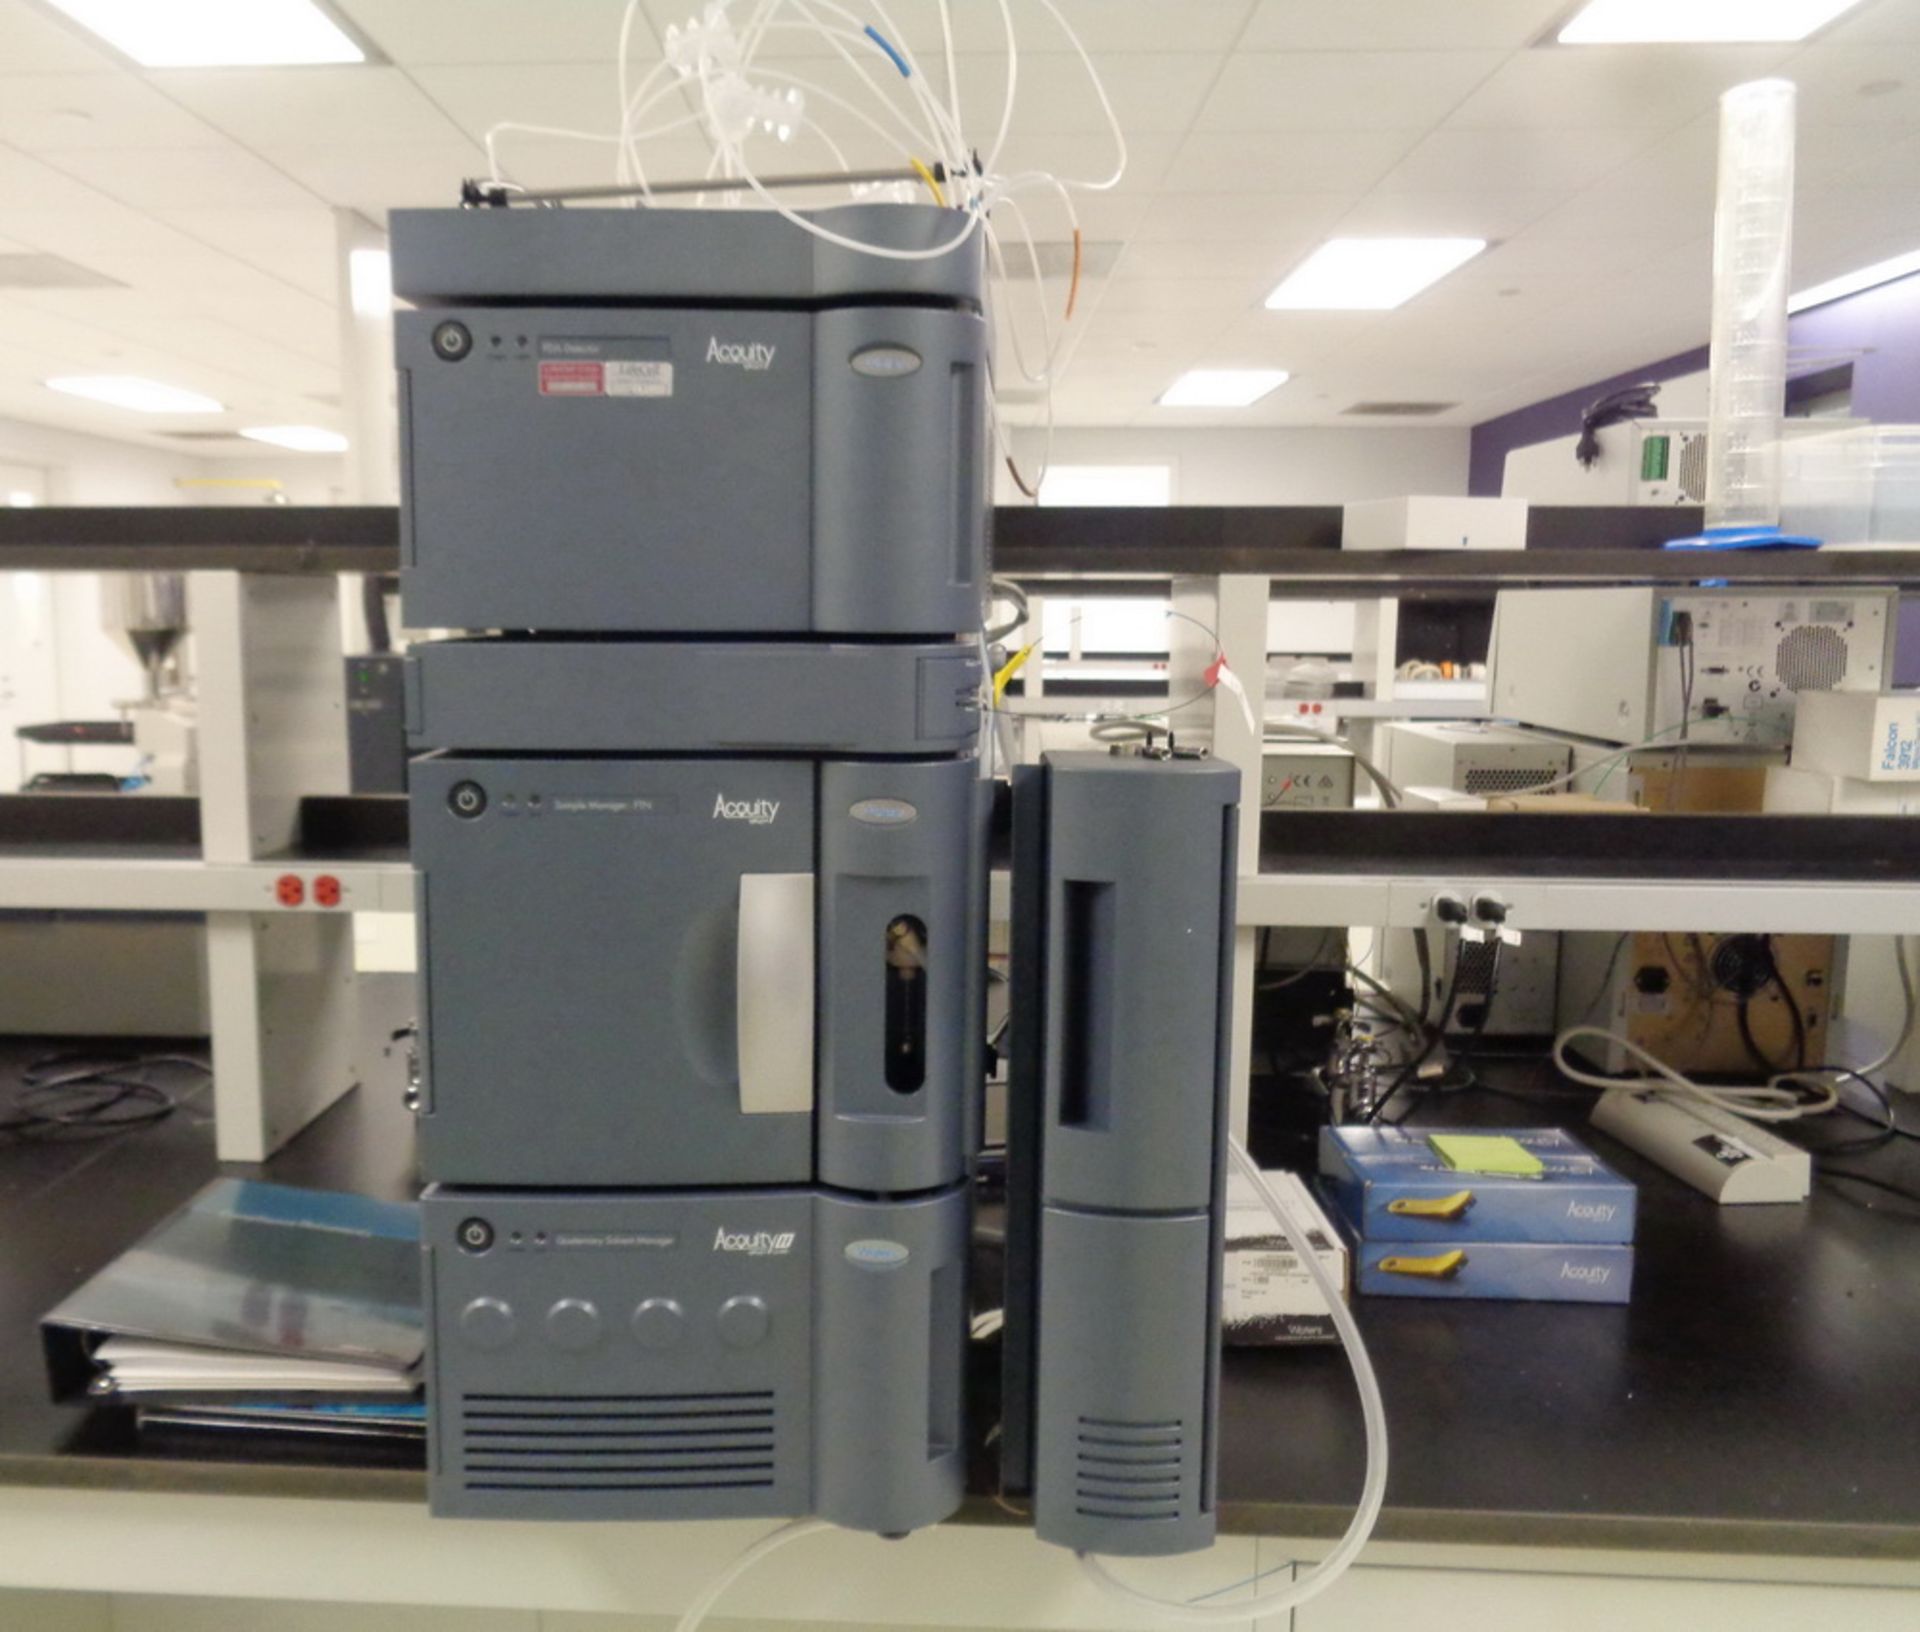 Waters Acquity 2 UPLC with PDA Detector, Sample Mgr-FTN, Quaternary Solvent Mgr, and Column Heater